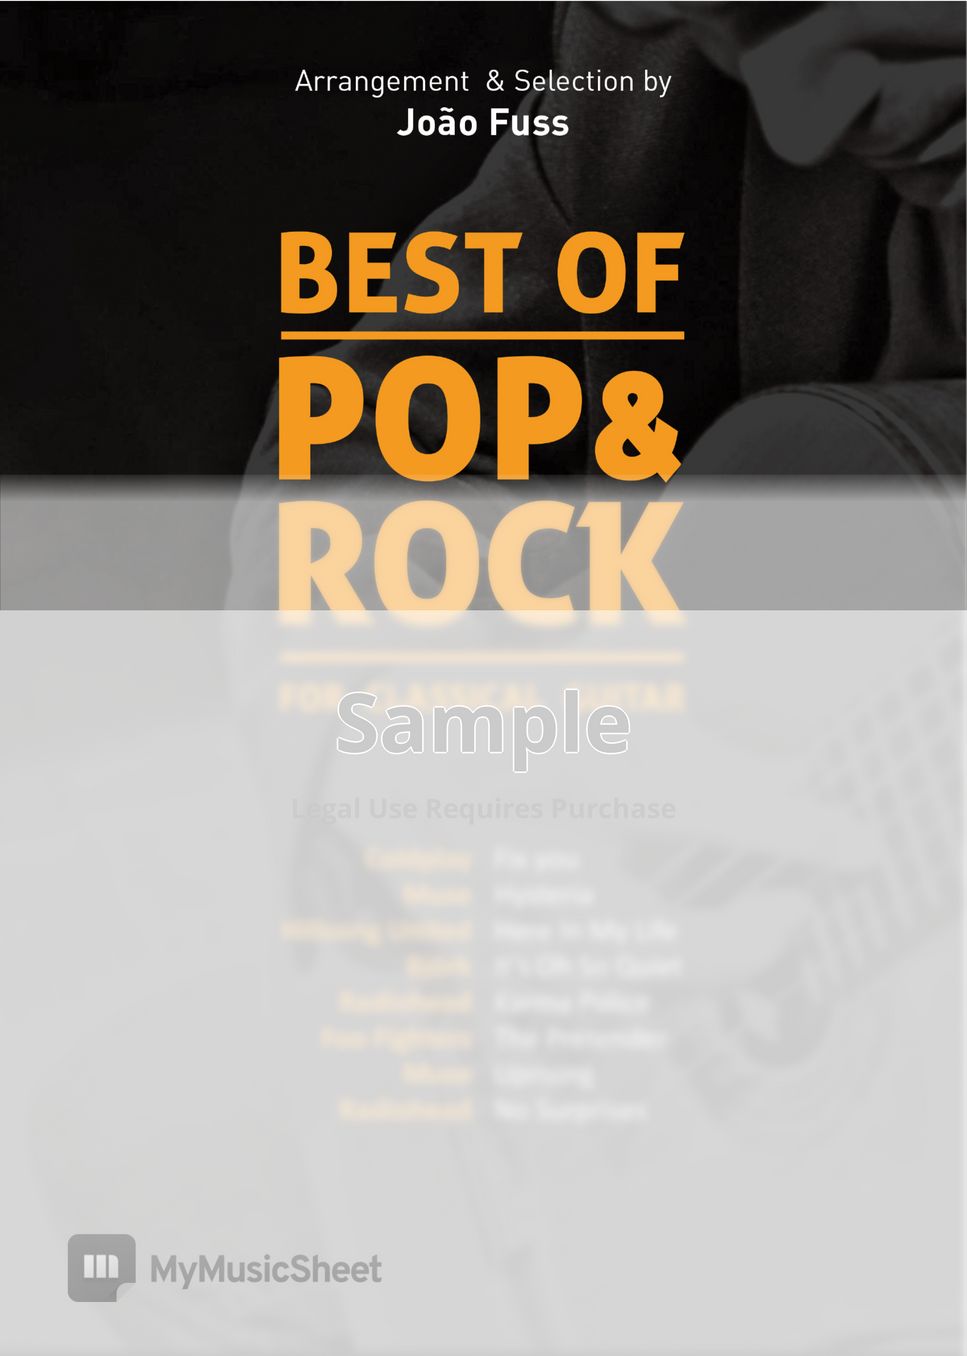 Hysteria - Muse - The Best of Pop/Rock for Classical Guitar by João Fuss